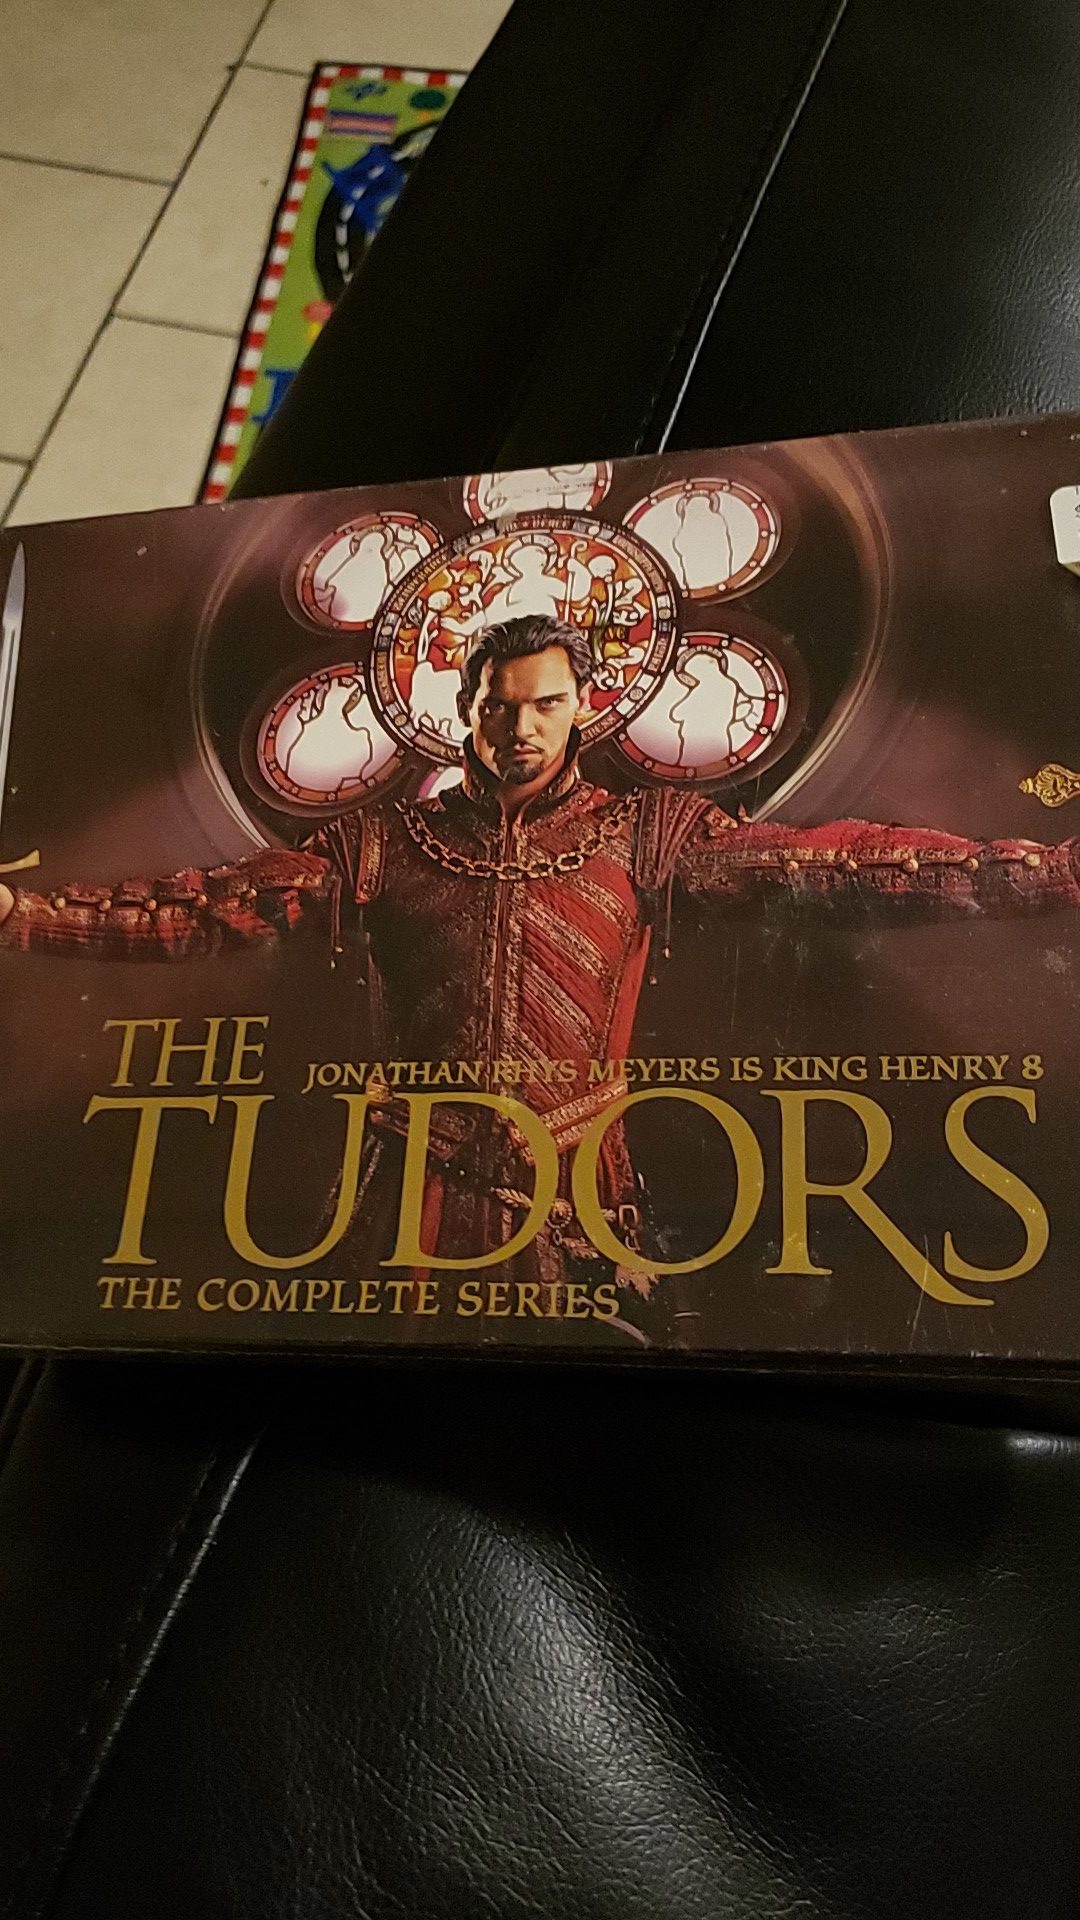 BRAND NEW THE TUDORS SERIES COLLECTION